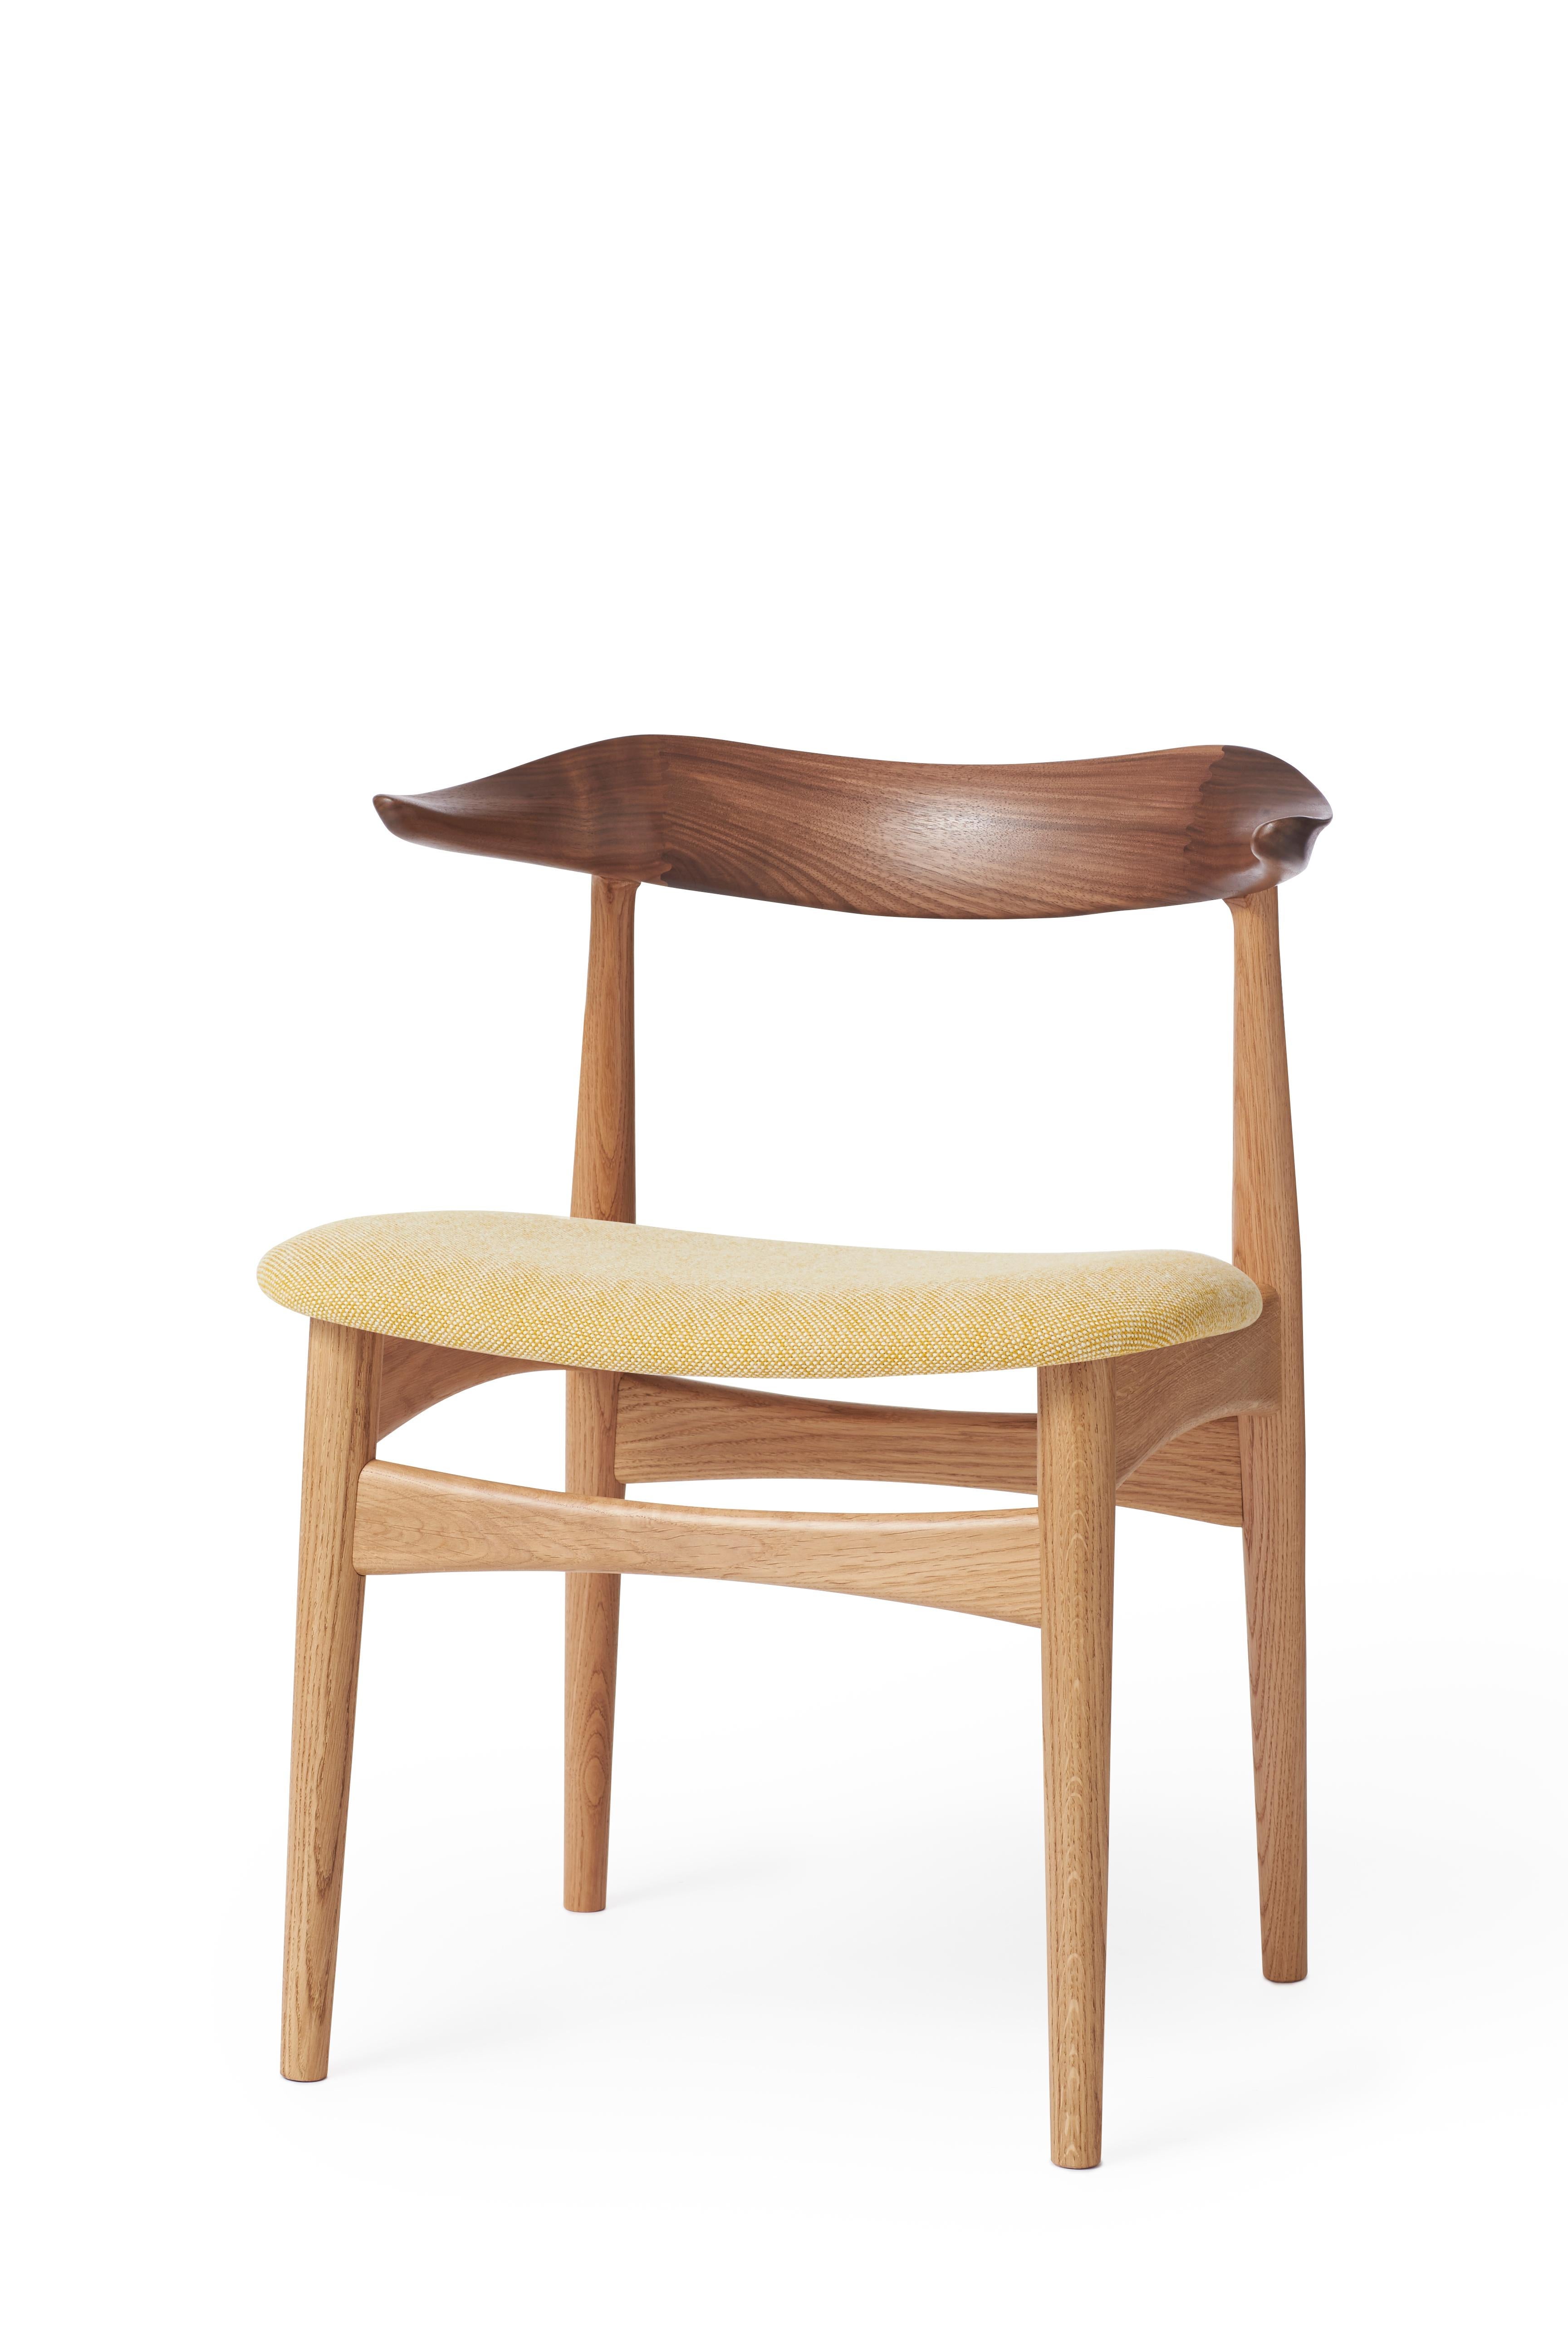 For Sale: Yellow (Halling 407) Cow Horn Mixed Wood Chair, by Knud Færch from Warm Nordic 2